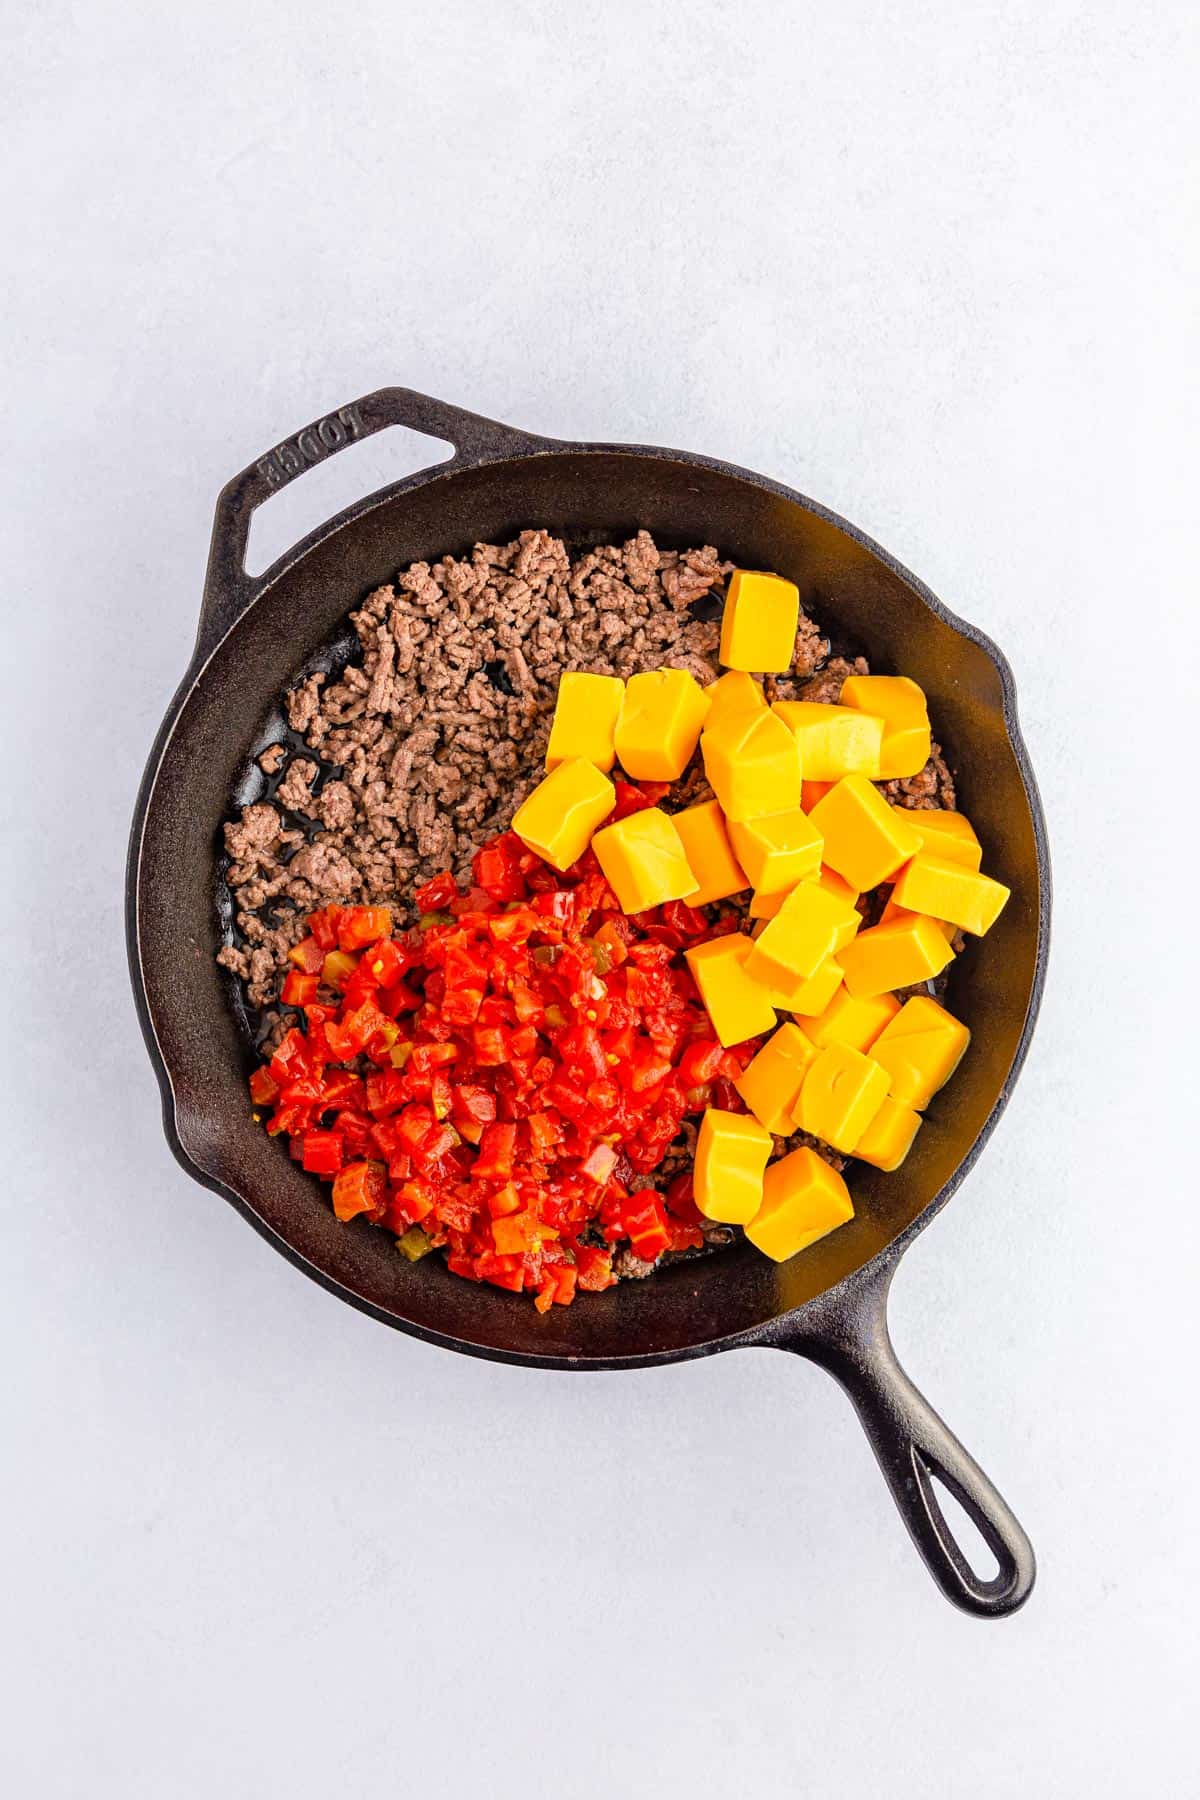 Adding Velveeta cheese and rotel tomatoes to ground beef in a cast iron pan.